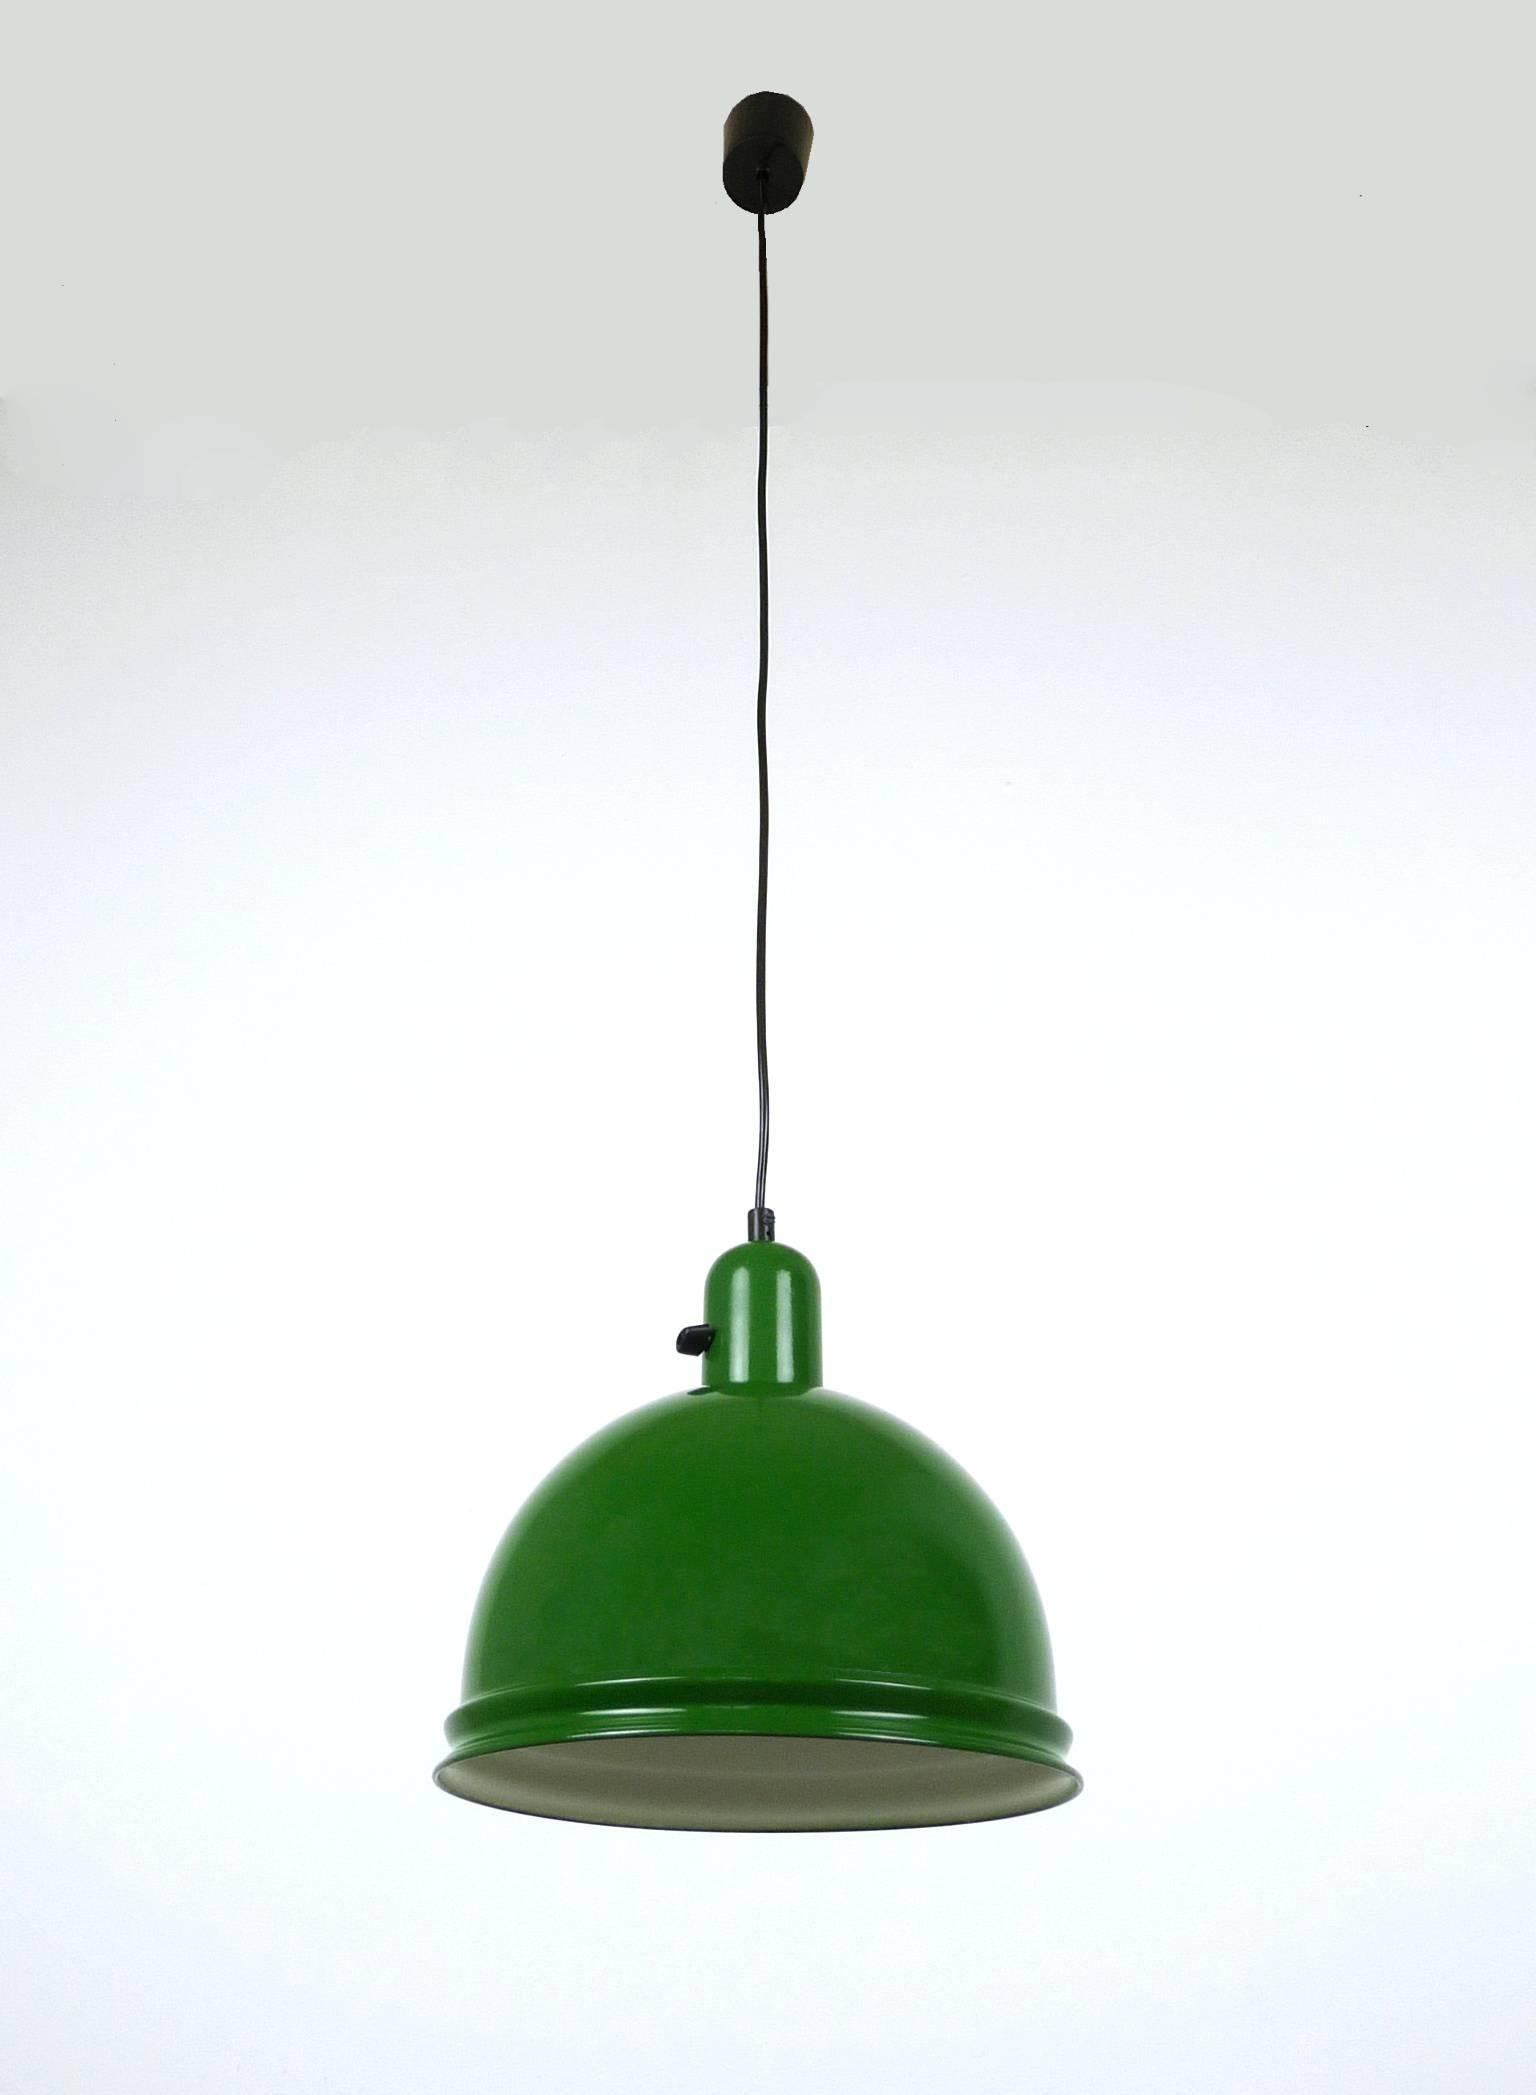 Lacquered Green Industrial Light from Germany, 1950s